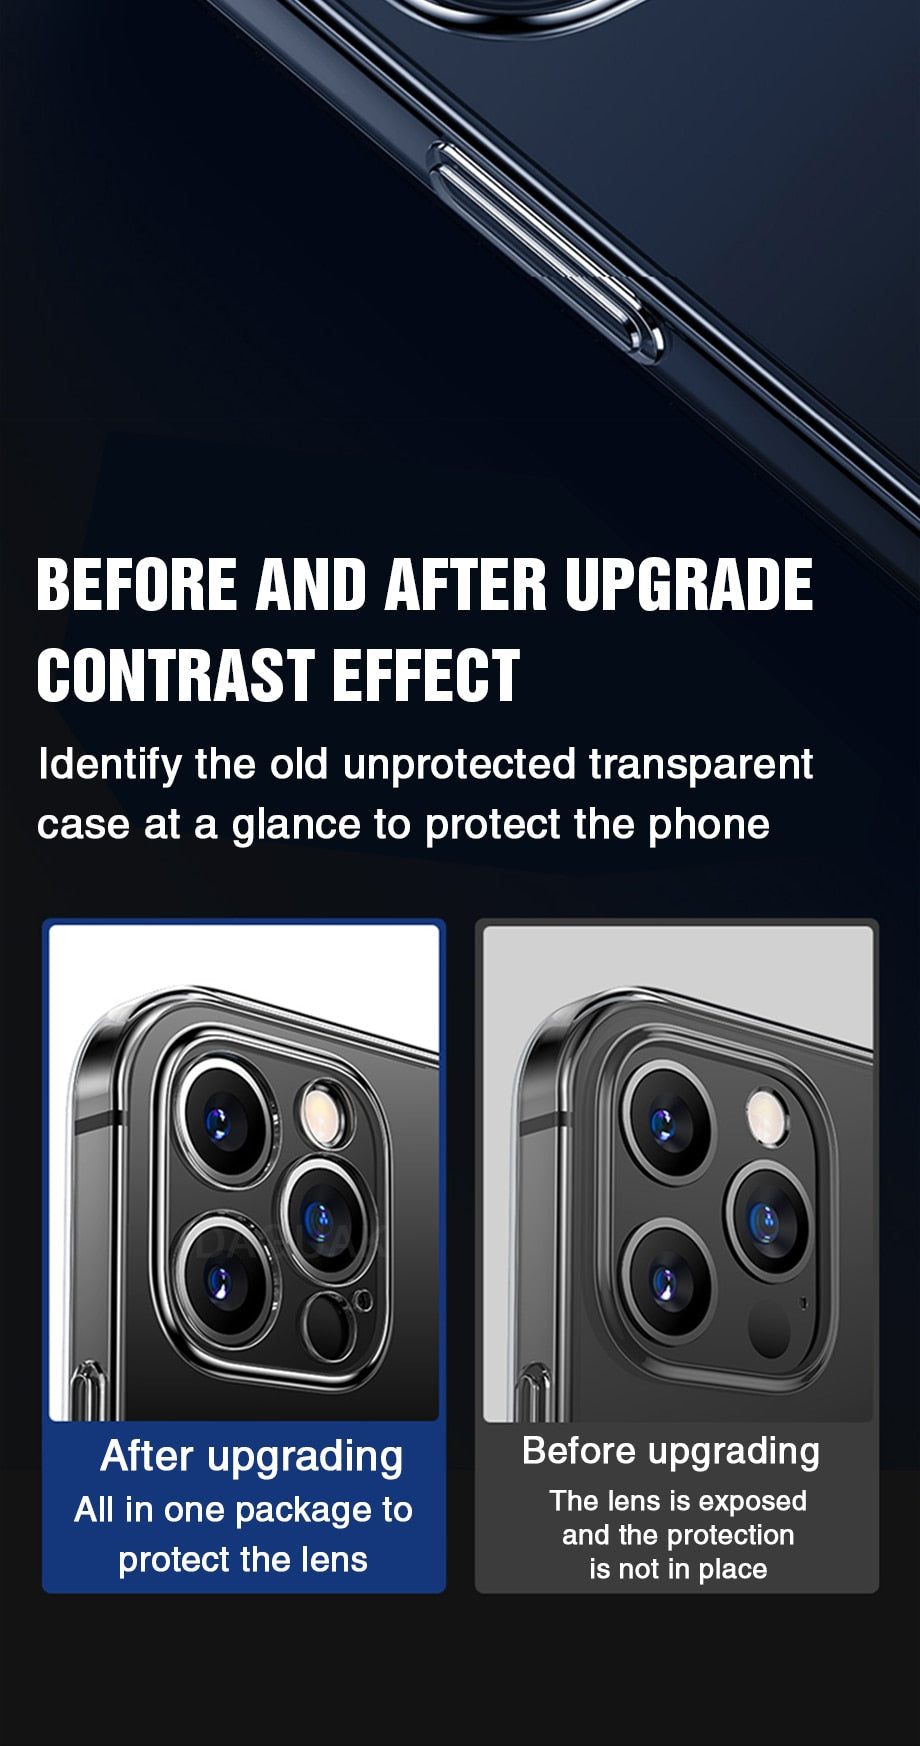 Camera Lens Protection Clear Phone Case For iPhone 12 Pro Max Silicone Soft Cover For iPhone 12 Mini Shockproof Back Cover The Clothing Company Sydney